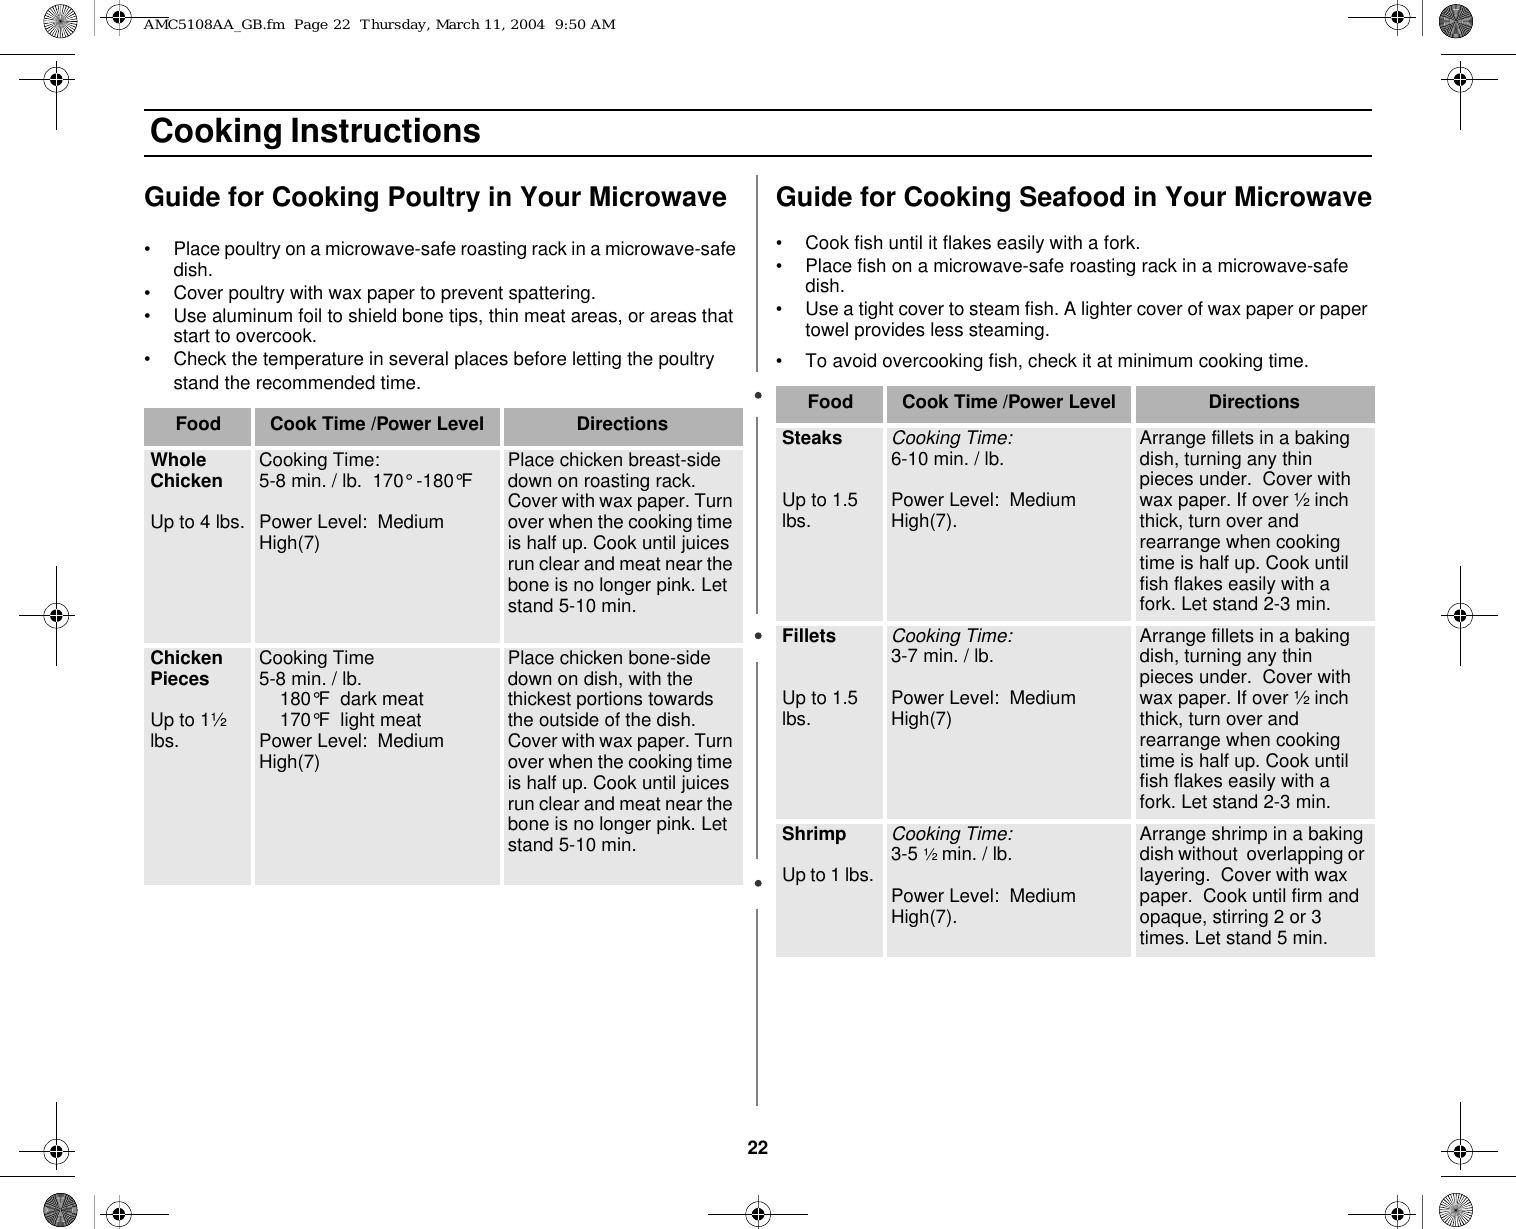 22 Cooking InstructionsGuide for Cooking Poultry in Your Microwave• Place poultry on a microwave-safe roasting rack in a microwave-safe dish.• Cover poultry with wax paper to prevent spattering.• Use aluminum foil to shield bone tips, thin meat areas, or areas that start to overcook.• Check the temperature in several places before letting the poultry stand the recommended time.Guide for Cooking Seafood in Your Microwave• Cook fish until it flakes easily with a fork.• Place fish on a microwave-safe roasting rack in a microwave-safe dish.• Use a tight cover to steam fish. A lighter cover of wax paper or paper towel provides less steaming.• To avoid overcooking fish, check it at minimum cooking time.Food Cook Time /Power Level DirectionsWhole ChickenUp to 4 lbs.Cooking Time:5-8 min. / lb.  170° -180°F  Power Level:  Medium High(7)Place chicken breast-side down on roasting rack. Cover with wax paper. Turn over when the cooking time is half up. Cook until juices run clear and meat near the bone is no longer pink. Let stand 5-10 min.Chicken  Pieces Up to 1½ lbs.Cooking Time5-8 min. / lb.      180°F  dark meat     170°F  light meatPower Level:  Medium High(7)Place chicken bone-side down on dish, with the thickest portions towards the outside of the dish. Cover with wax paper. Turn over when the cooking time is half up. Cook until juices run clear and meat near the bone is no longer pink. Let stand 5-10 min.Food Cook Time /Power Level DirectionsSteaksUp to 1.5 lbs.Cooking Time:6-10 min. / lb.  Power Level:  Medium High(7).Arrange fillets in a baking dish, turning any thin pieces under.  Cover with wax paper. If over ½ inch thick, turn over and rearrange when cooking time is half up. Cook until fish flakes easily with a fork. Let stand 2-3 min.FilletsUp to 1.5 lbs.Cooking Time:3-7 min. / lb. Power Level:  Medium High(7)Arrange fillets in a baking dish, turning any thin pieces under.  Cover with wax paper. If over ½ inch thick, turn over and rearrange when cooking time is half up. Cook until fish flakes easily with a fork. Let stand 2-3 min.ShrimpUp to 1 lbs. Cooking Time:3-5 ½ min. / lb.Power Level:  Medium High(7).Arrange shrimp in a baking dish without  overlapping or layering.  Cover with wax paper.  Cook until firm and opaque, stirring 2 or 3 times. Let stand 5 min.AMC5108AA_GB.fm  Page 22  Thursday, March 11, 2004  9:50 AM